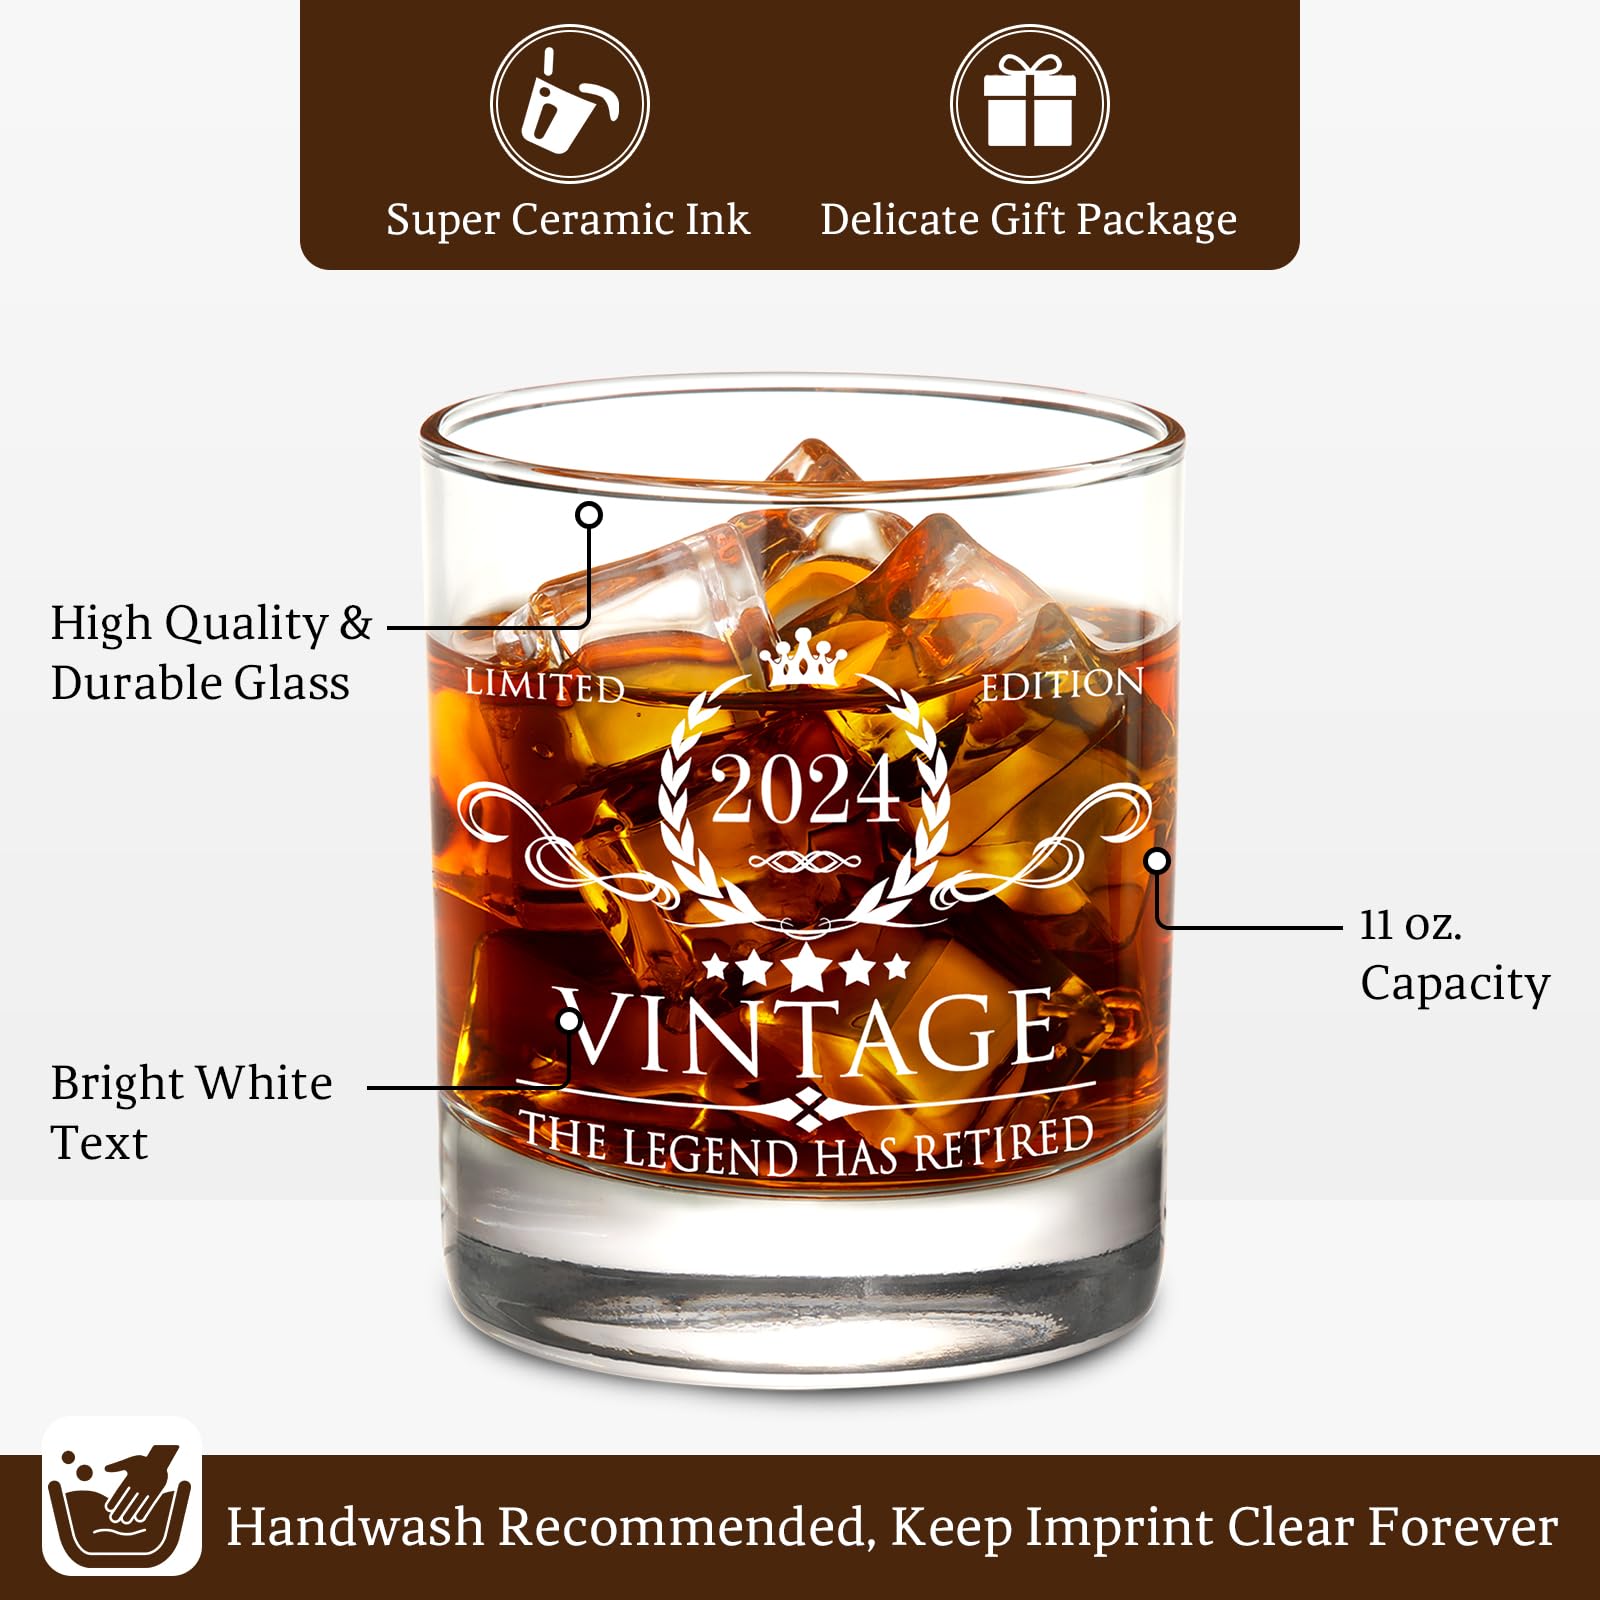 Retirement Gifts for Men Whiskey Glass Set - The Legend Has Retired 2024 - Retirement Party Decorations, Supplies - Gifts Ideas for Him, Dad, Husband, Friends - Wood Box & Whiskey Stones & Coaster